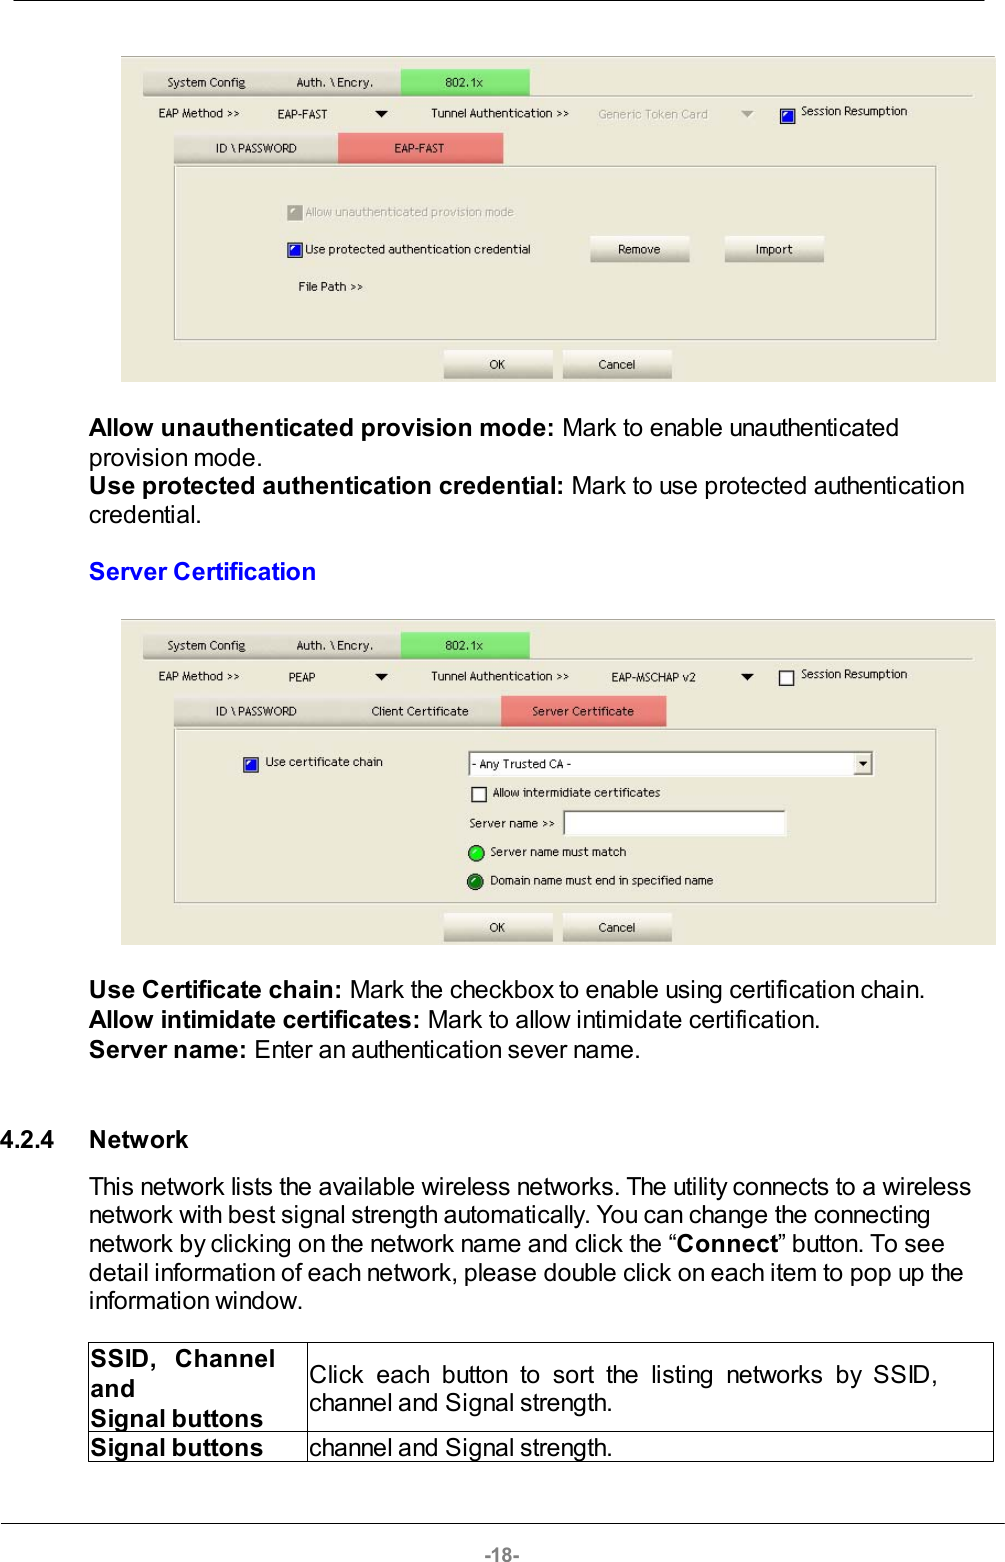 -18-Allow unauthenticated provision mode: Mark to enable unauthenticatedprovision mode.Use protected authentication credential: Mark to use protected authenticationcredential.Server CertificationUse Certificate chain: Mark the checkbox to enable using certification chain. Allow intimidate certificates: Mark to allow intimidate certification. Server name: Enter an authentication sever name. 4.2.4 NetworkThis network lists the available wireless networks. The utility connects to a wirelessnetwork with best signal strength automatically. You can change the connectingnetwork by clicking on the network name and click the “Connect” button. To seedetail information of each network, please double click on each item to pop up theinformation window. SSID,   Channel  and Signal buttons Click  each  button  to  sort  the  listing  networks  by  SSID,channel and Signal strength.Signal buttonschannel and Signal strength.